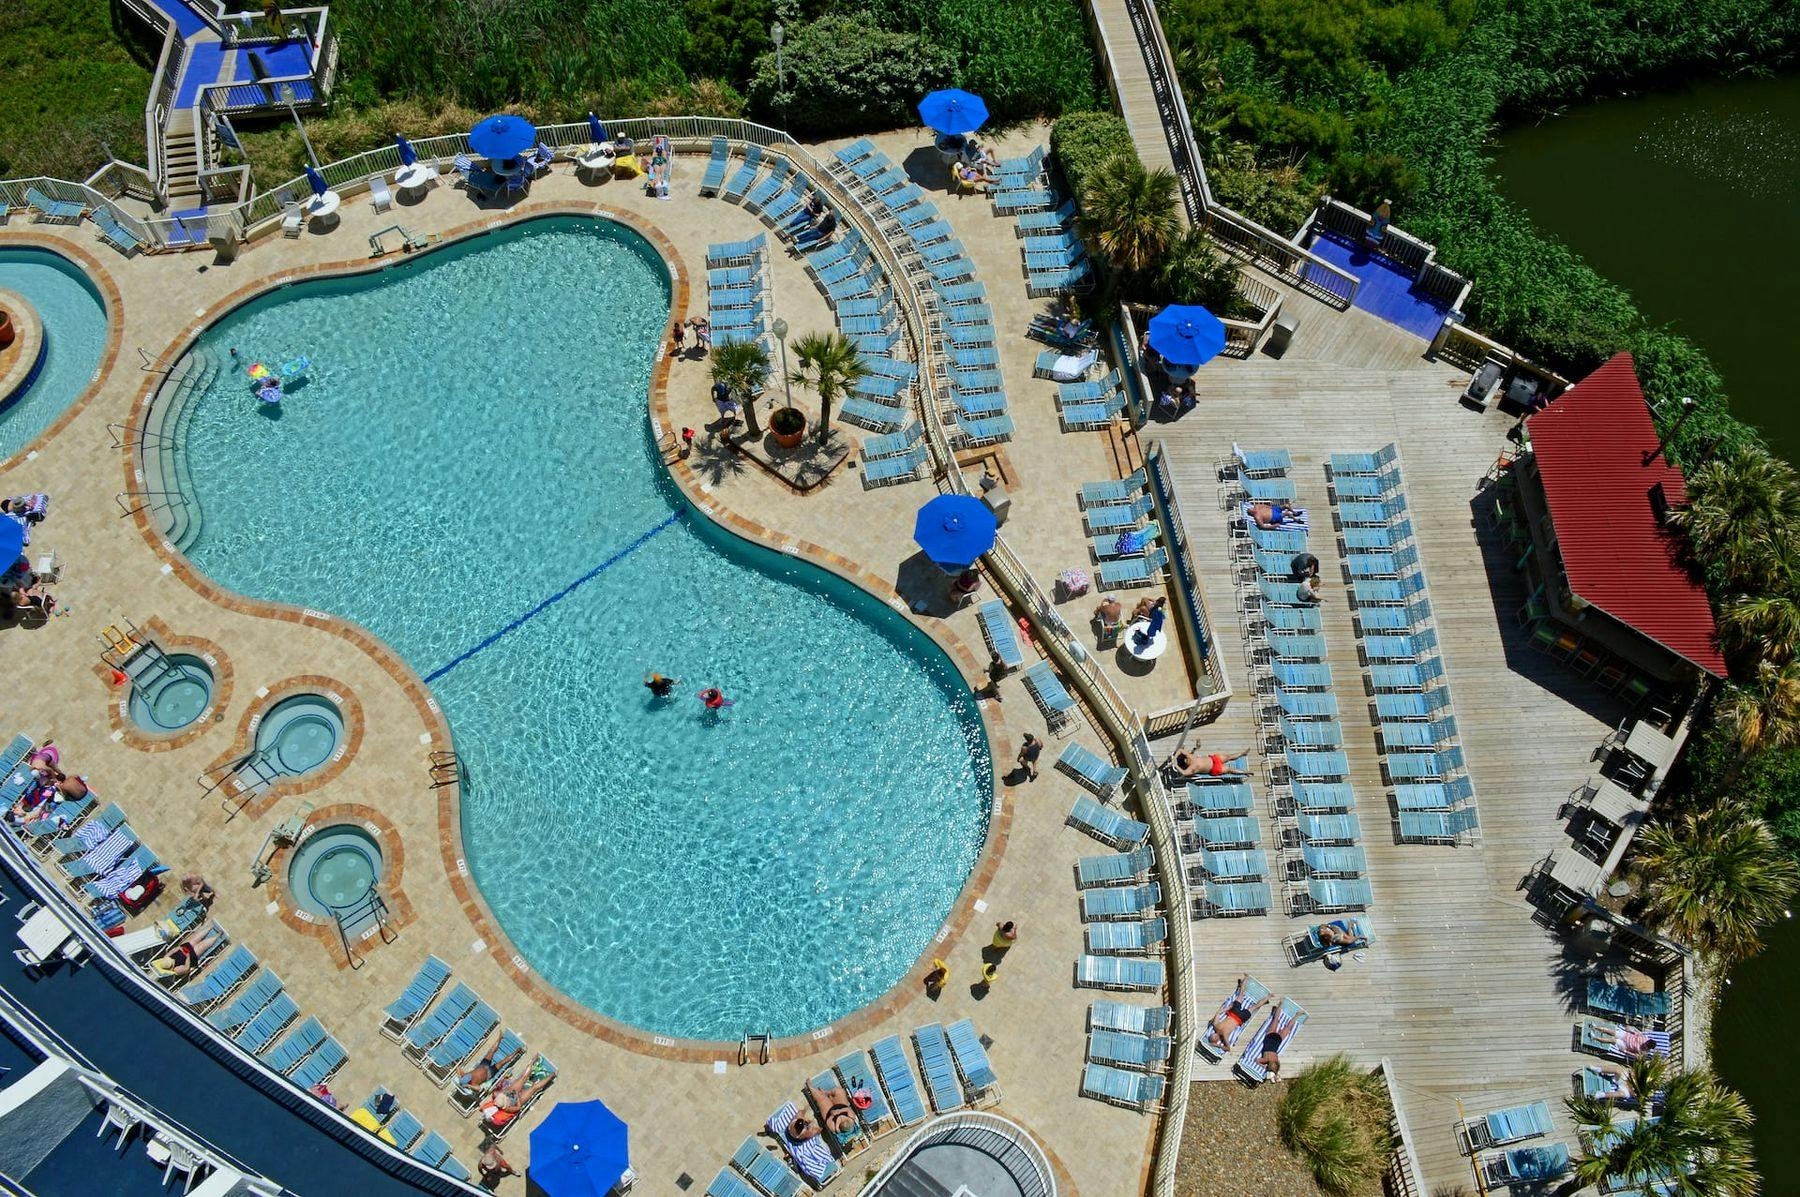 Aerial view of Myrtle Beach pool for vacation rental guests